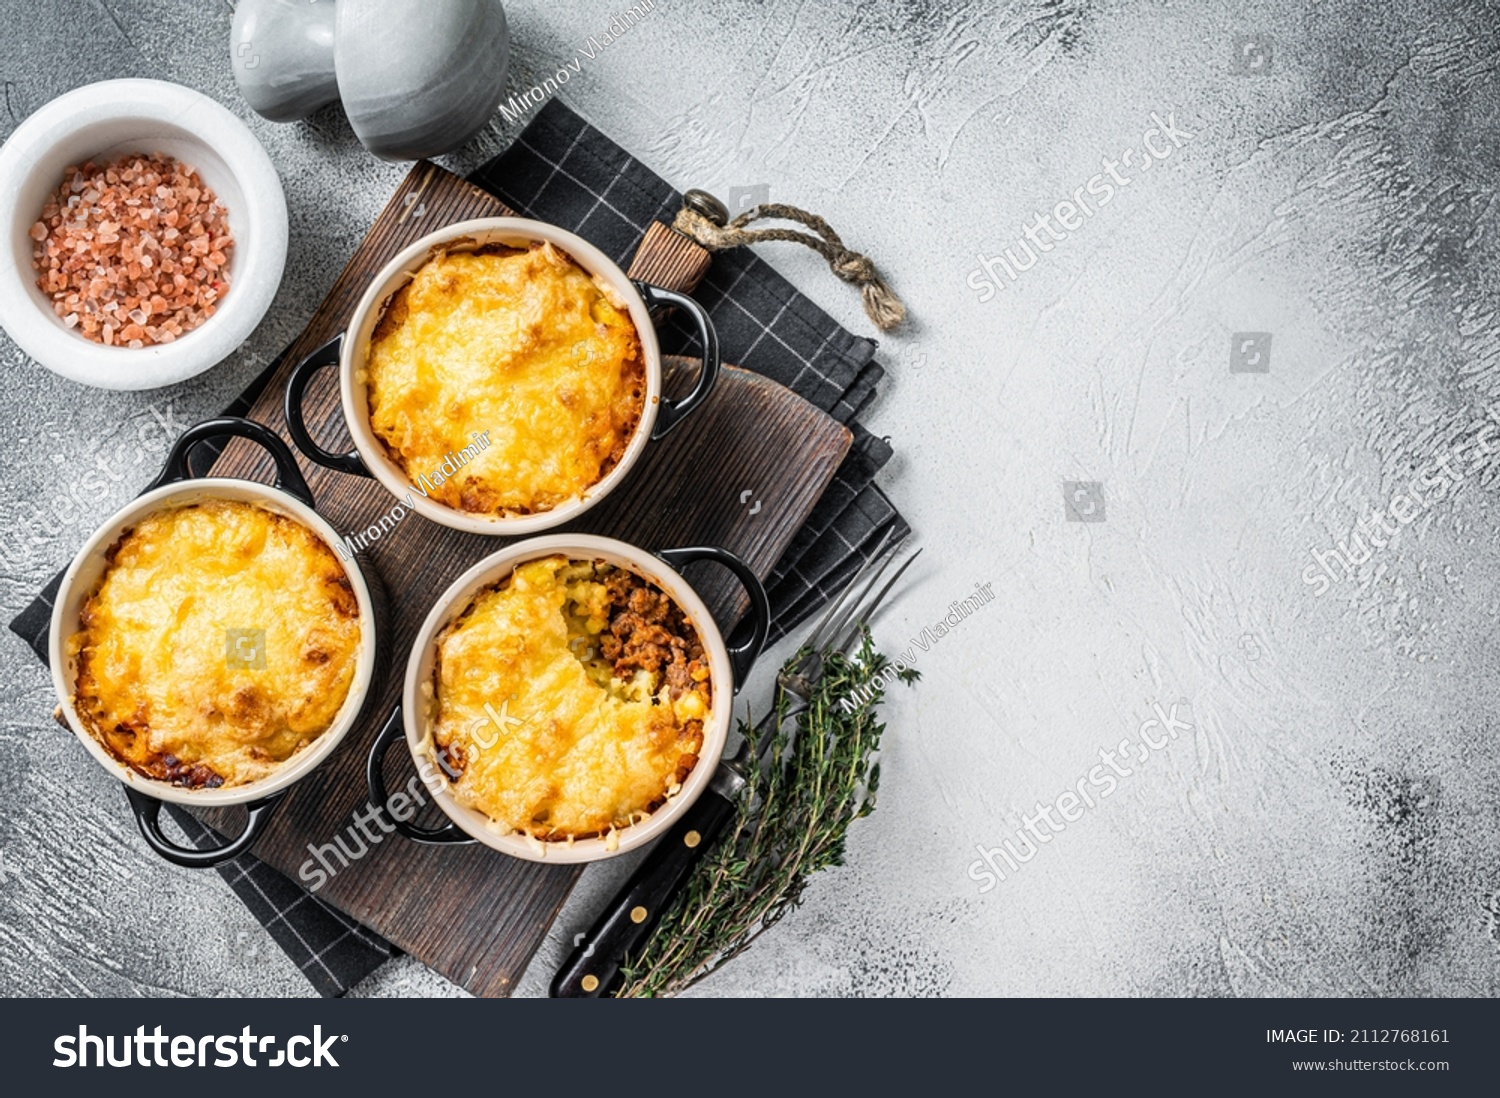 British dish Shepherd's pie with ground meat, mashed potato and cheddar cheese crust. White background. Top view. Copy space #2112768161